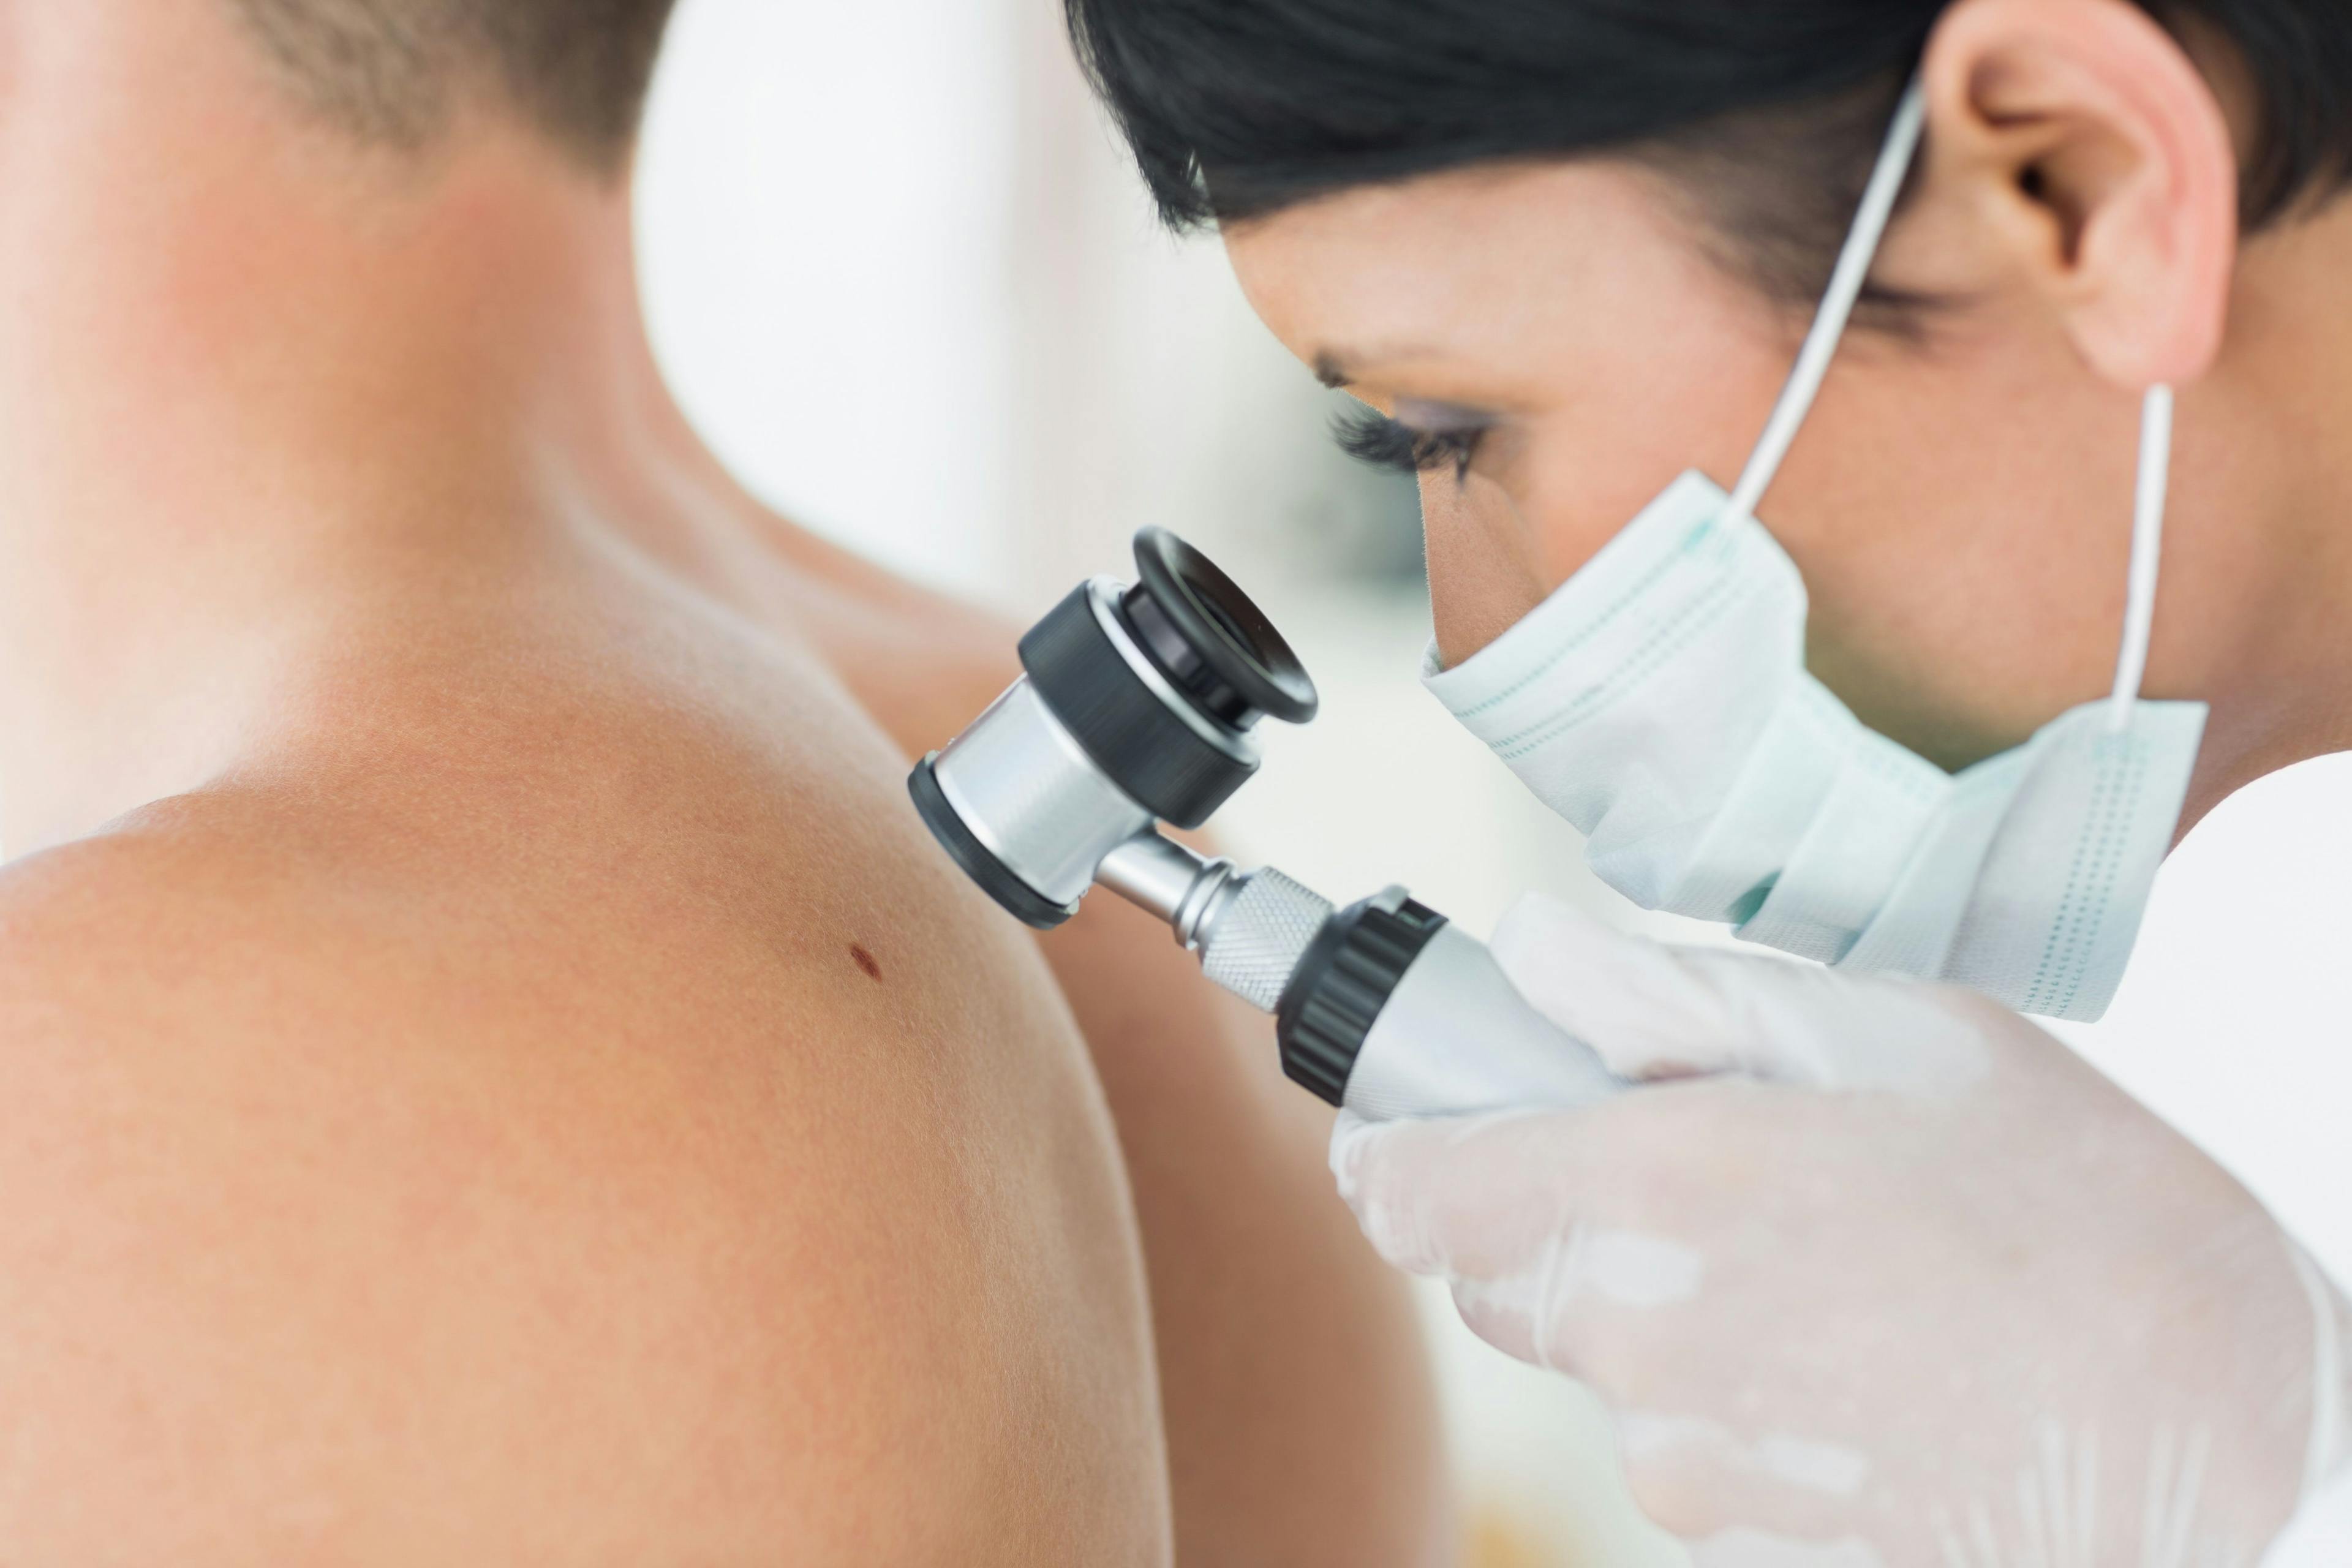 Patient Age Impacts Satisfaction with Physician-Provided Melanoma Information